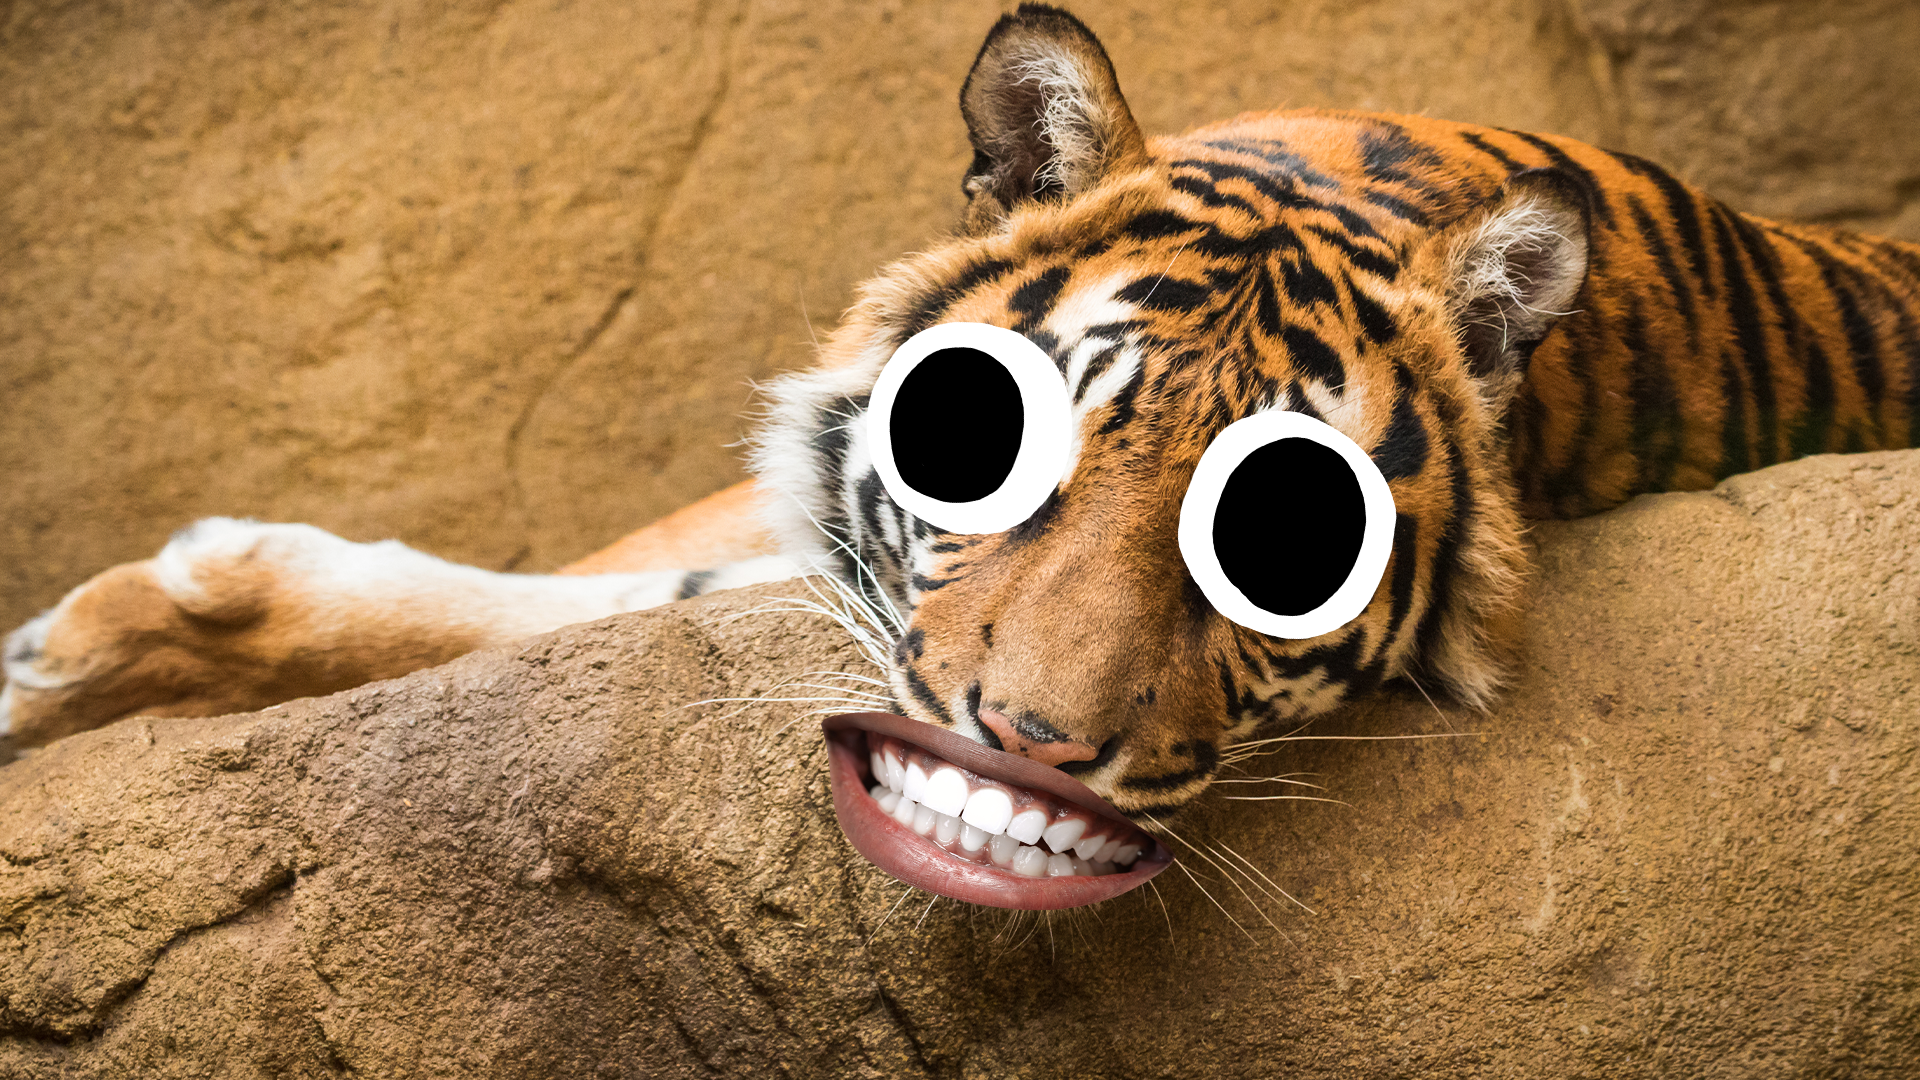 Goofy tiger in zoo